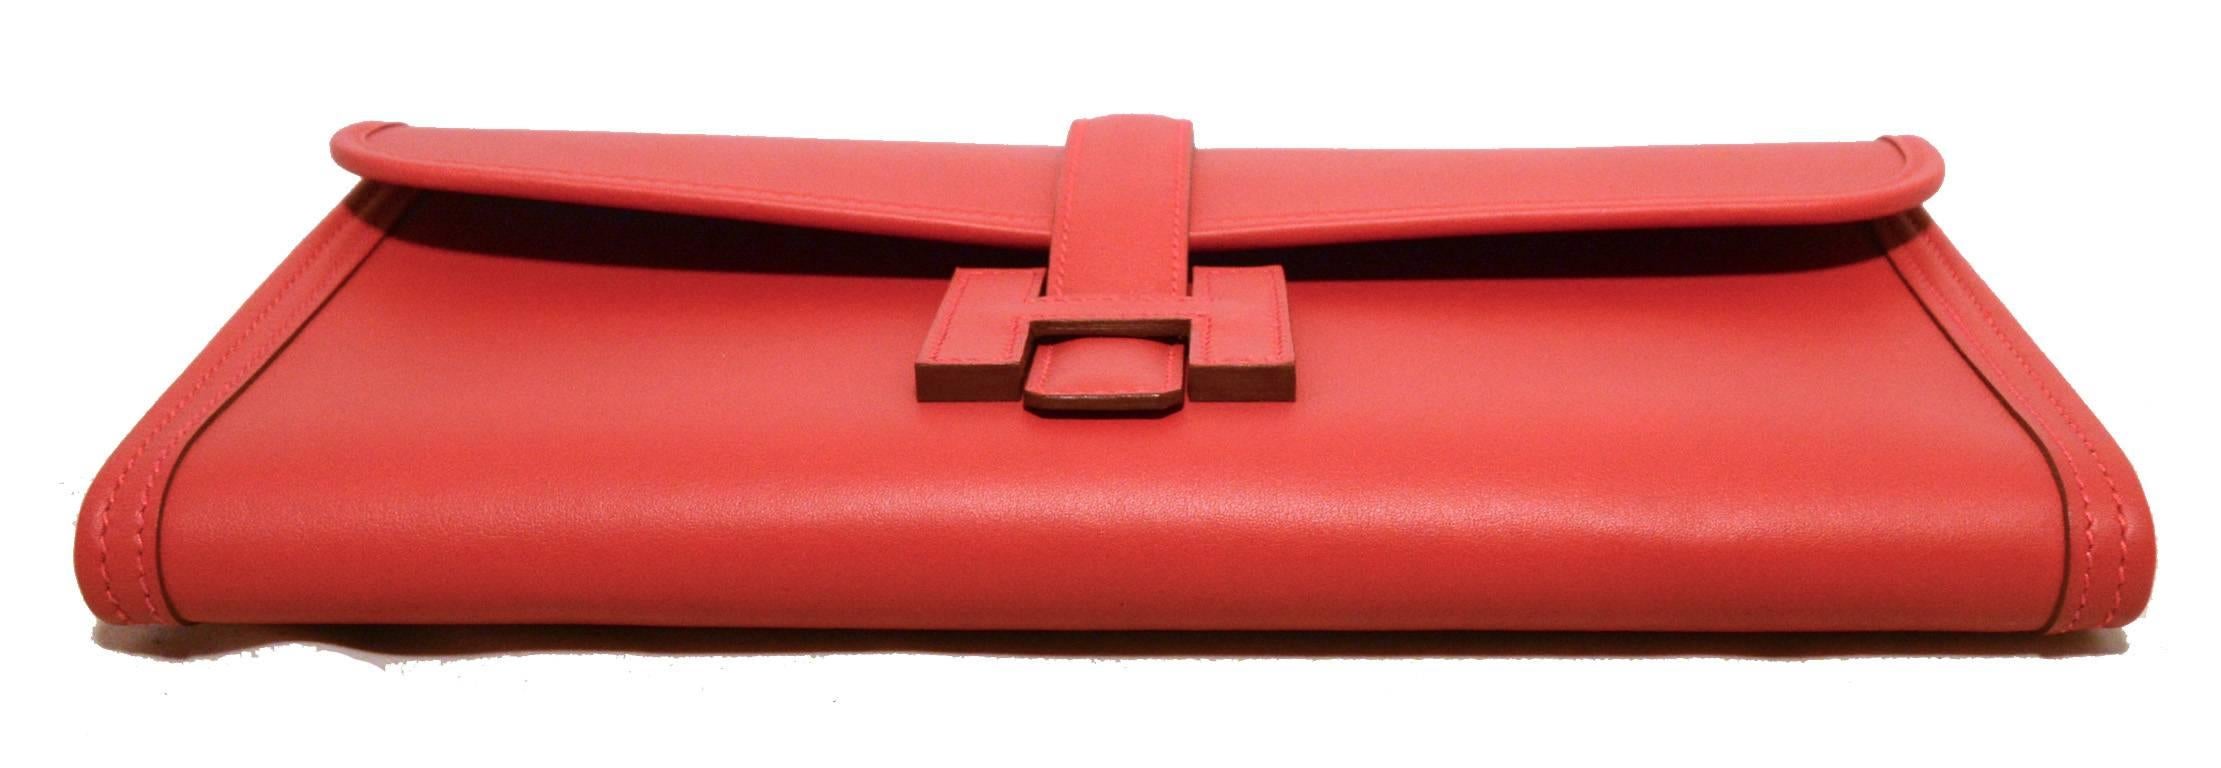 Stunning Hermes Red Jige Swift Leather Clutch 3